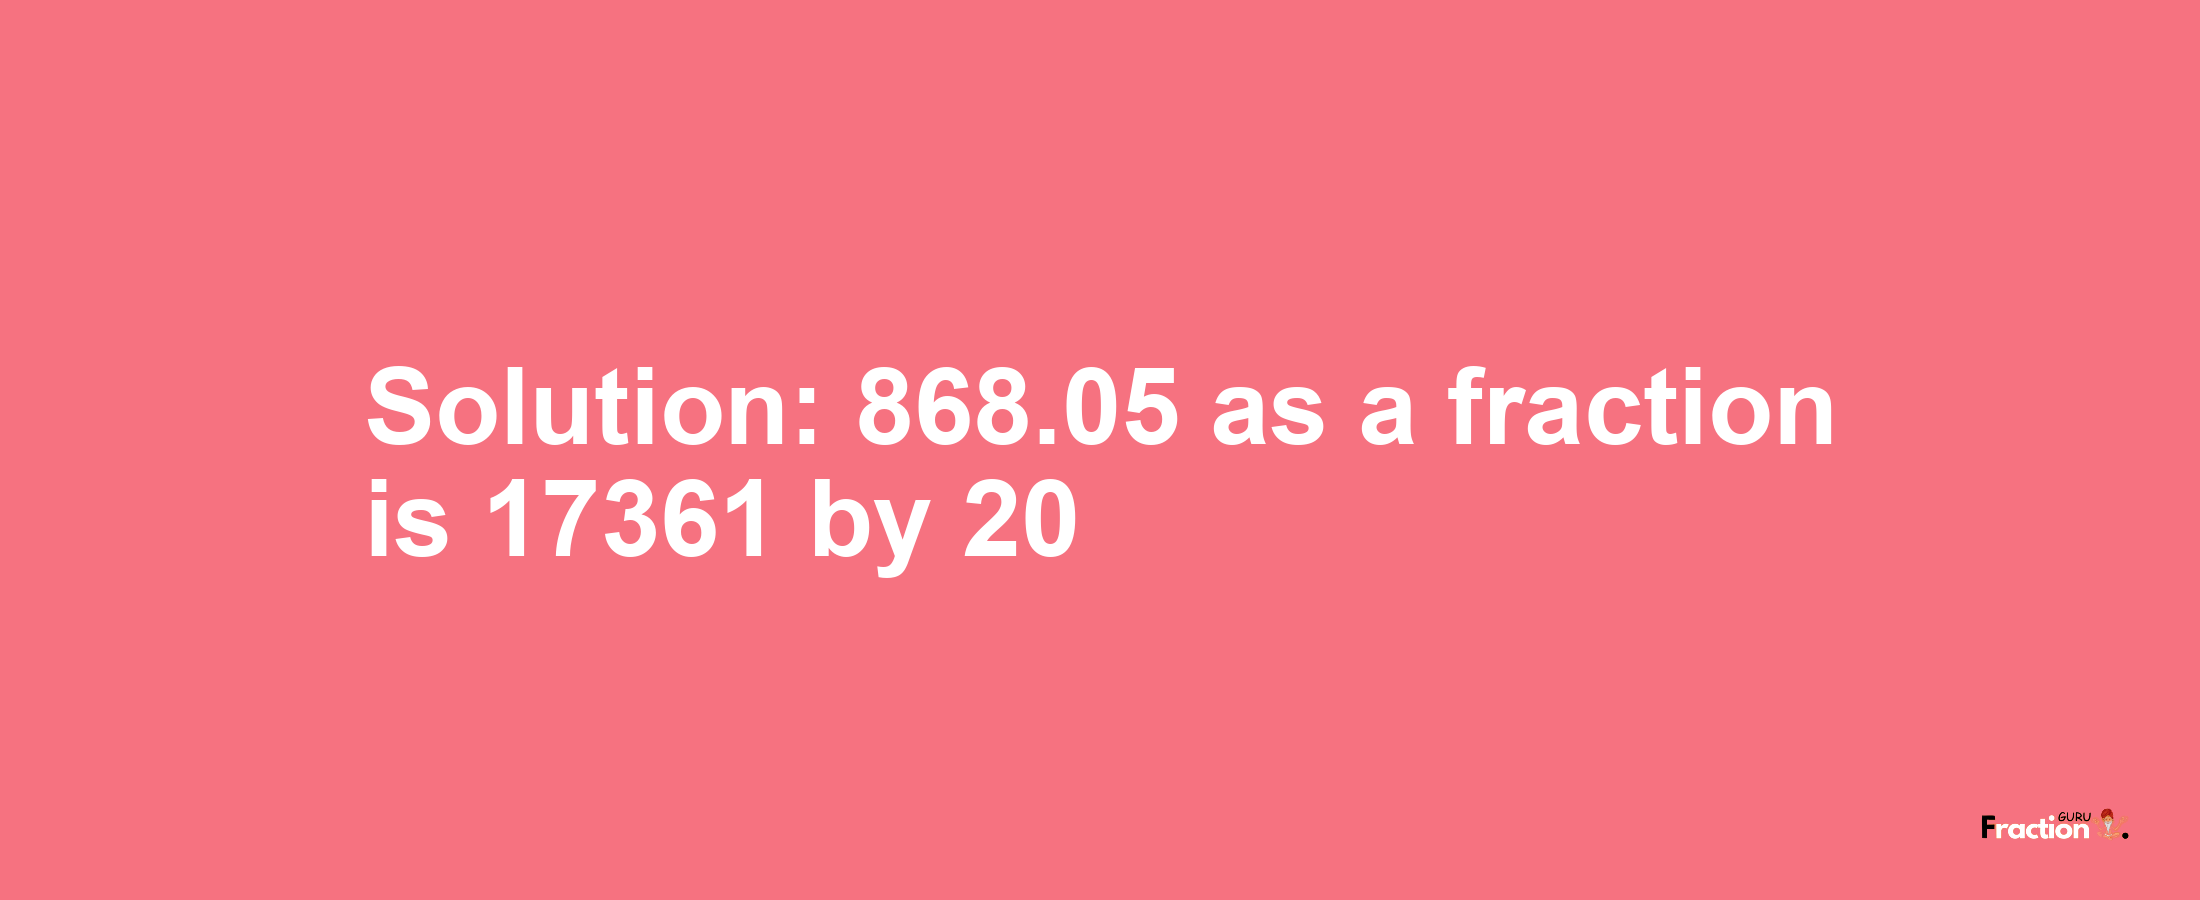 Solution:868.05 as a fraction is 17361/20